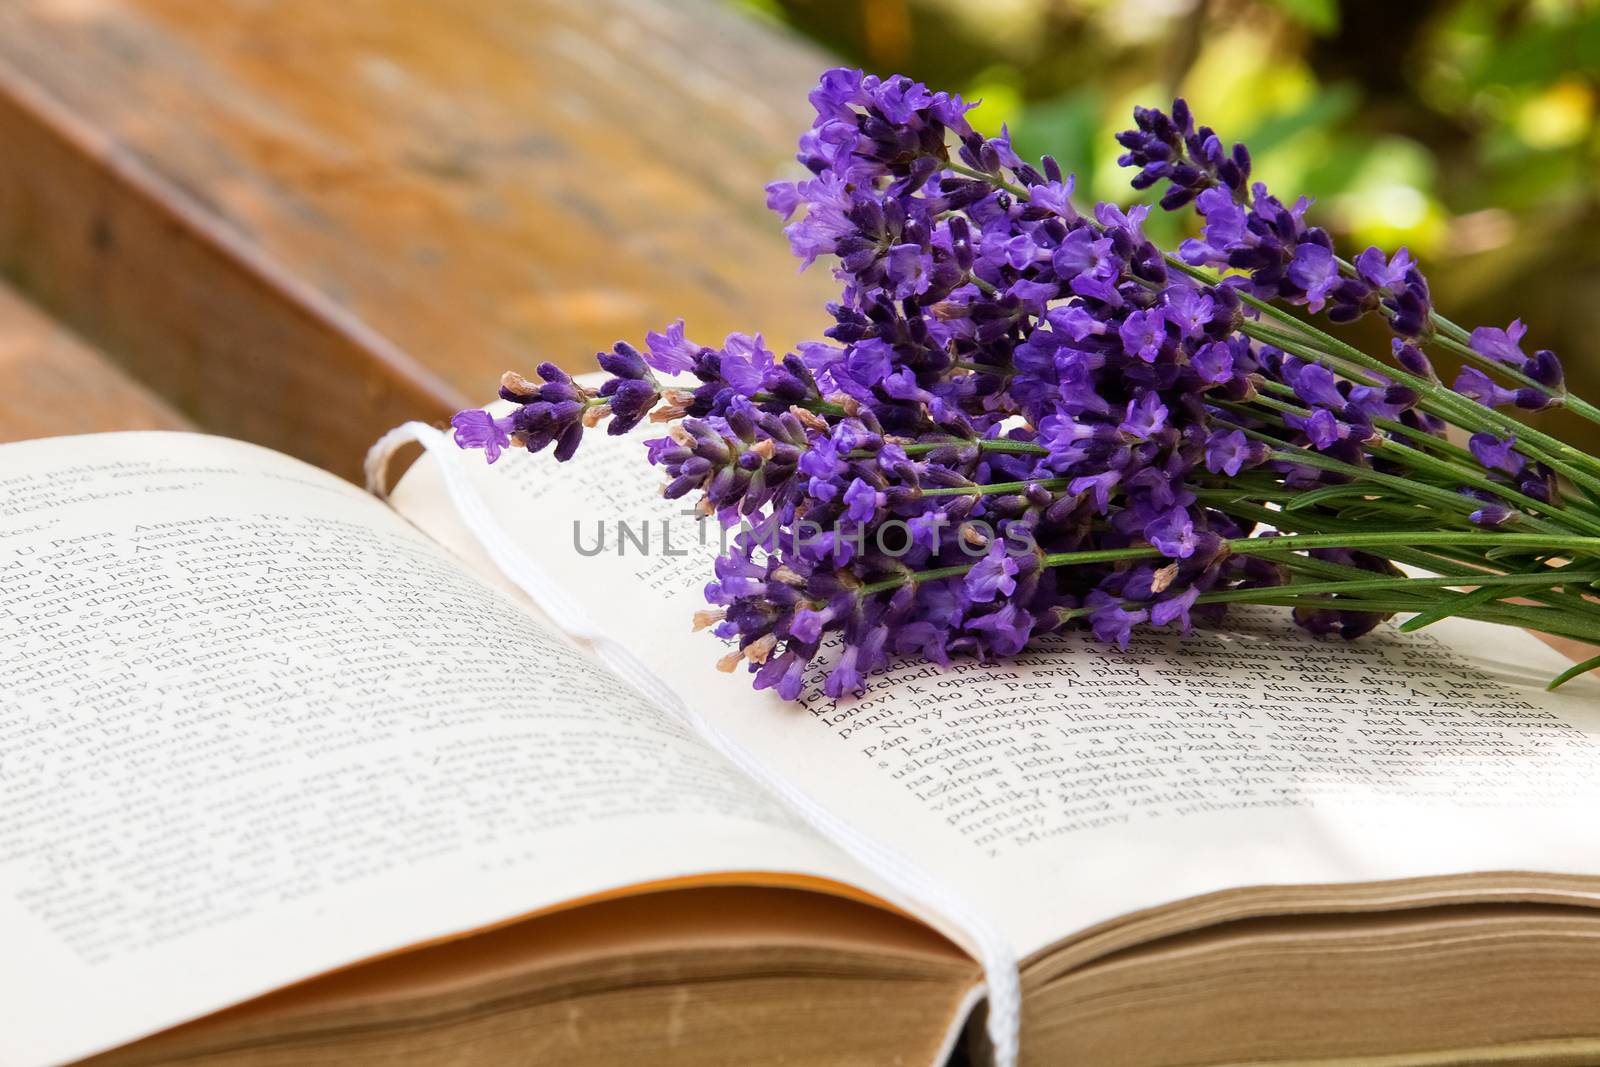 Lavender on the book